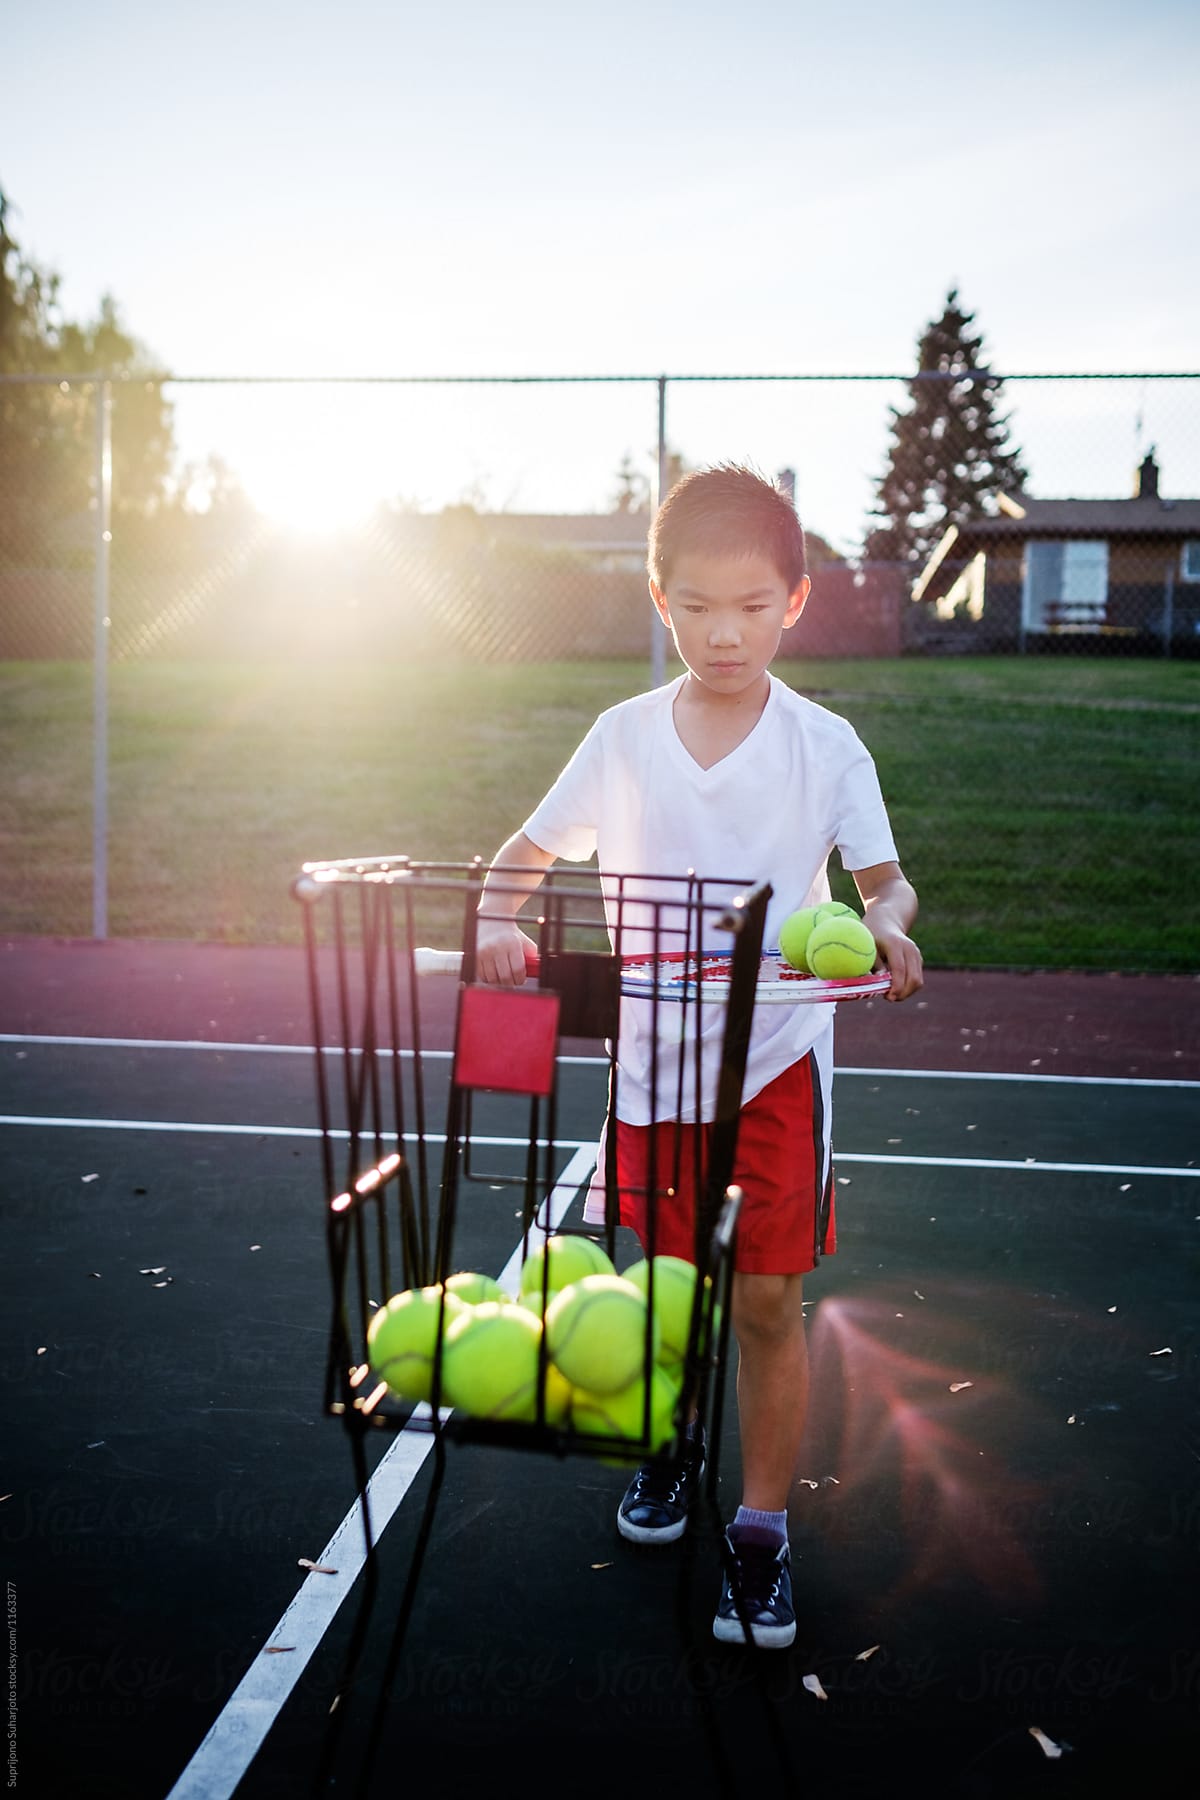 Asian kid playing tennis on the outdoor tennis court